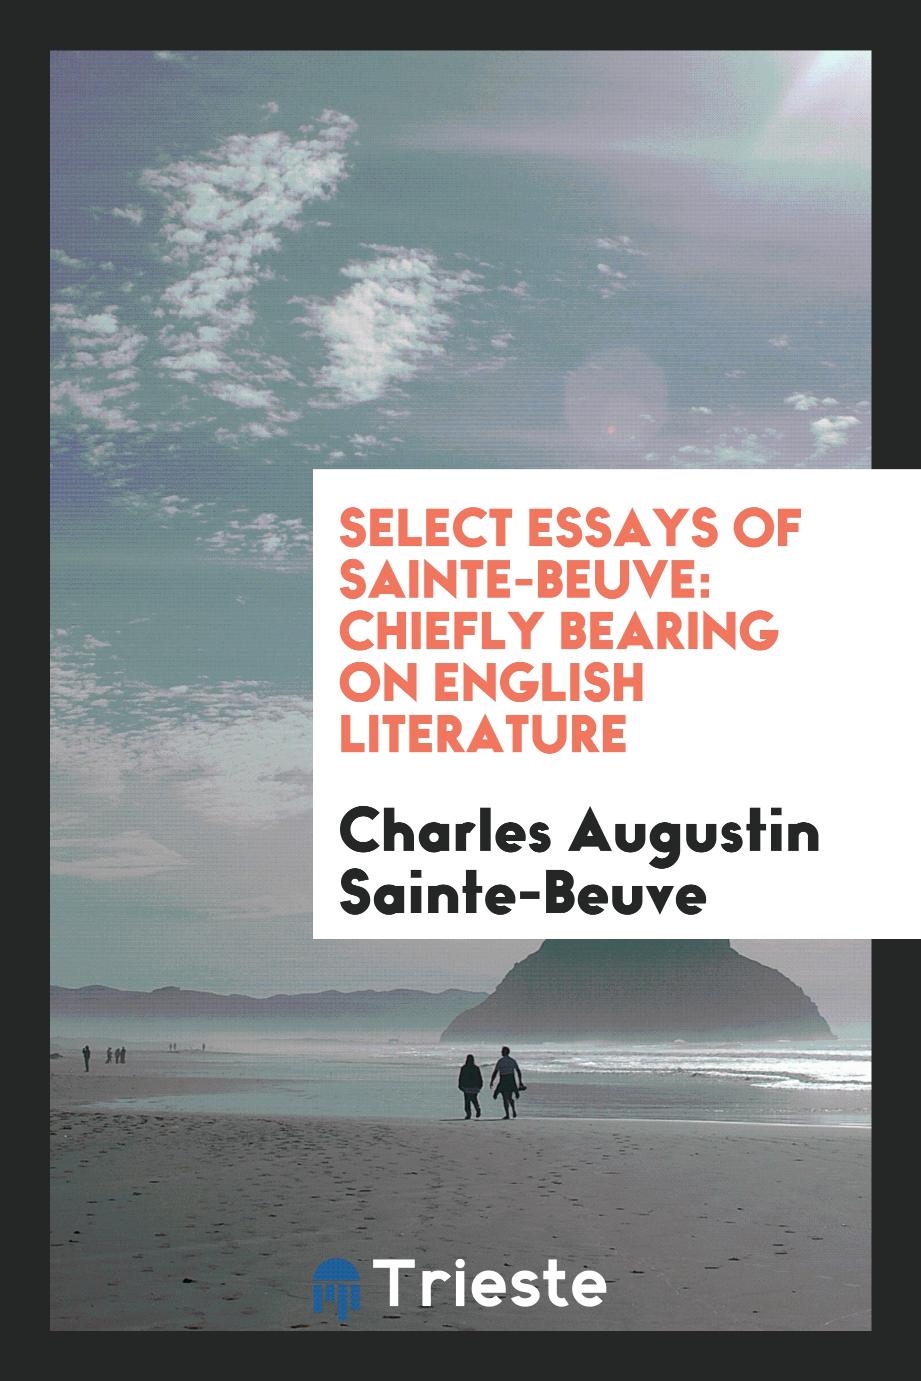 Select essays of Sainte-Beuve: chiefly bearing on English literature